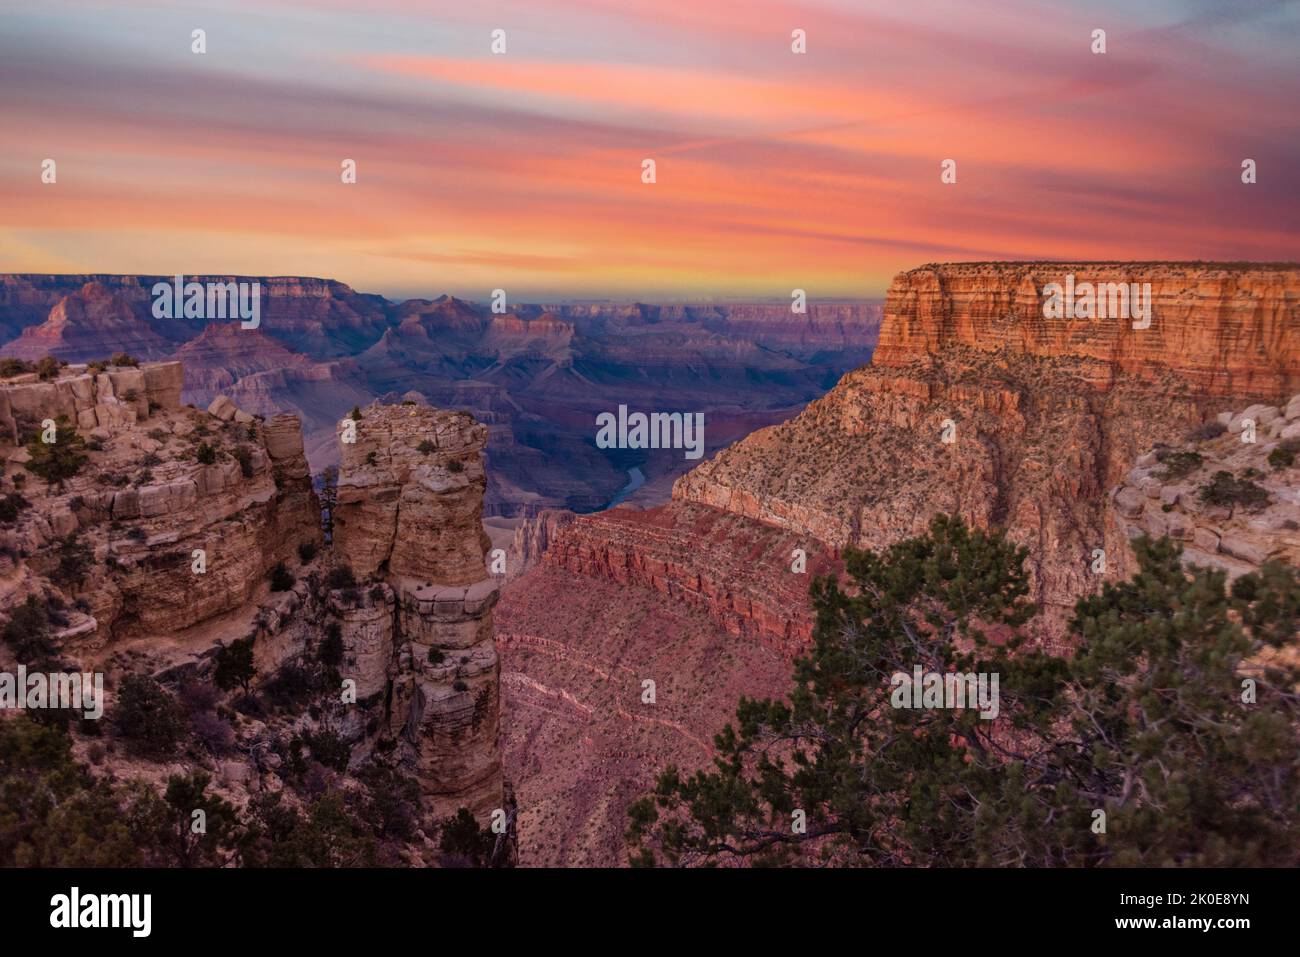 A view of the rugged yet beautiful and dramatic Grand Canyon national park during a moody sunset shows the intricate details of the ridges and formati Stock Photo